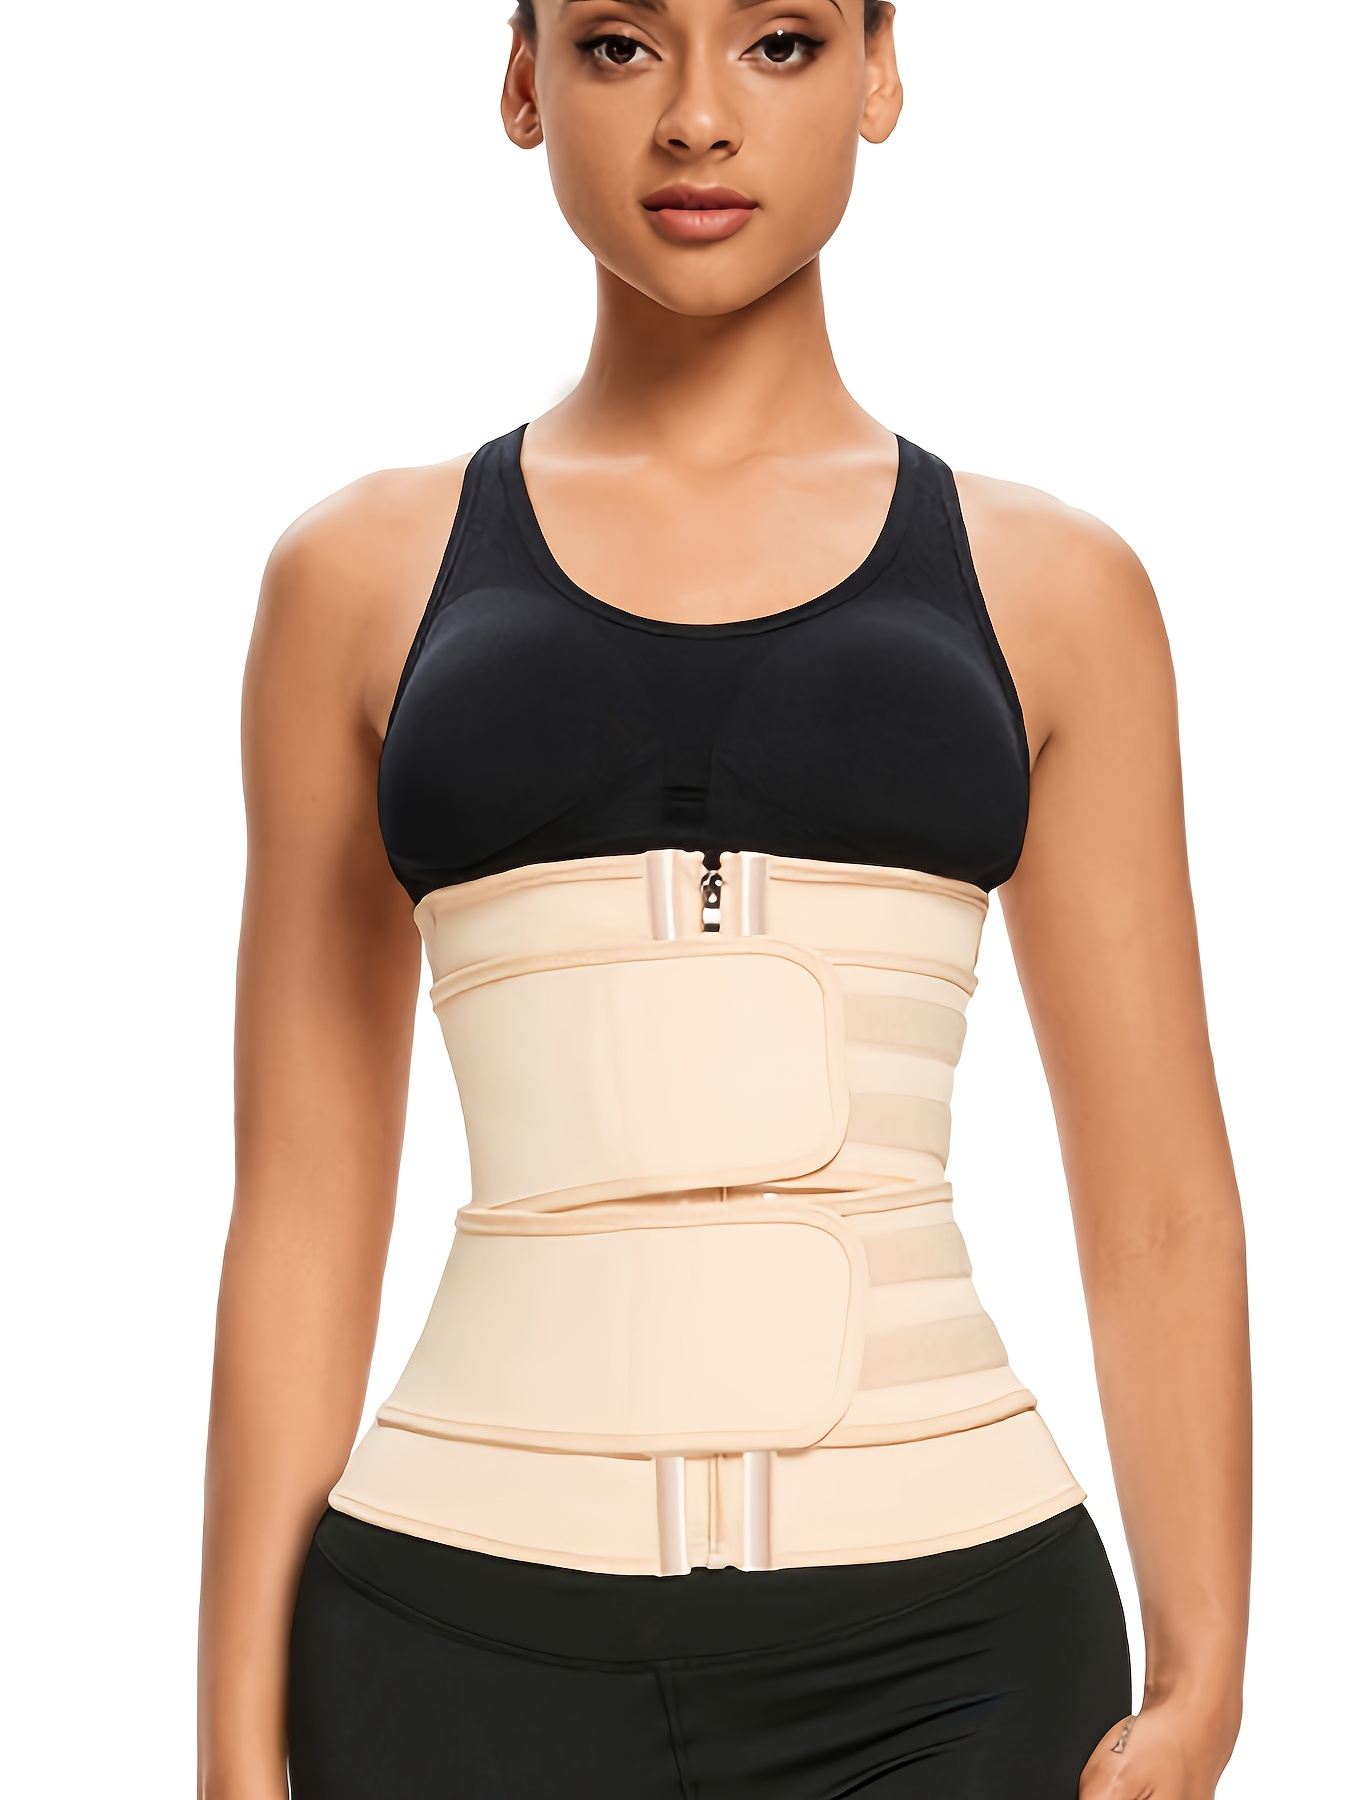 Buy Shopogenix 3 Meter Waist Trainer for Women Lower Belly Fat,Waist Wraps  for Stomach,Belly Band for Women Plus Size Weight,Waste Trimmer for Women  Under Clothes,Sweat Belt (Black). at